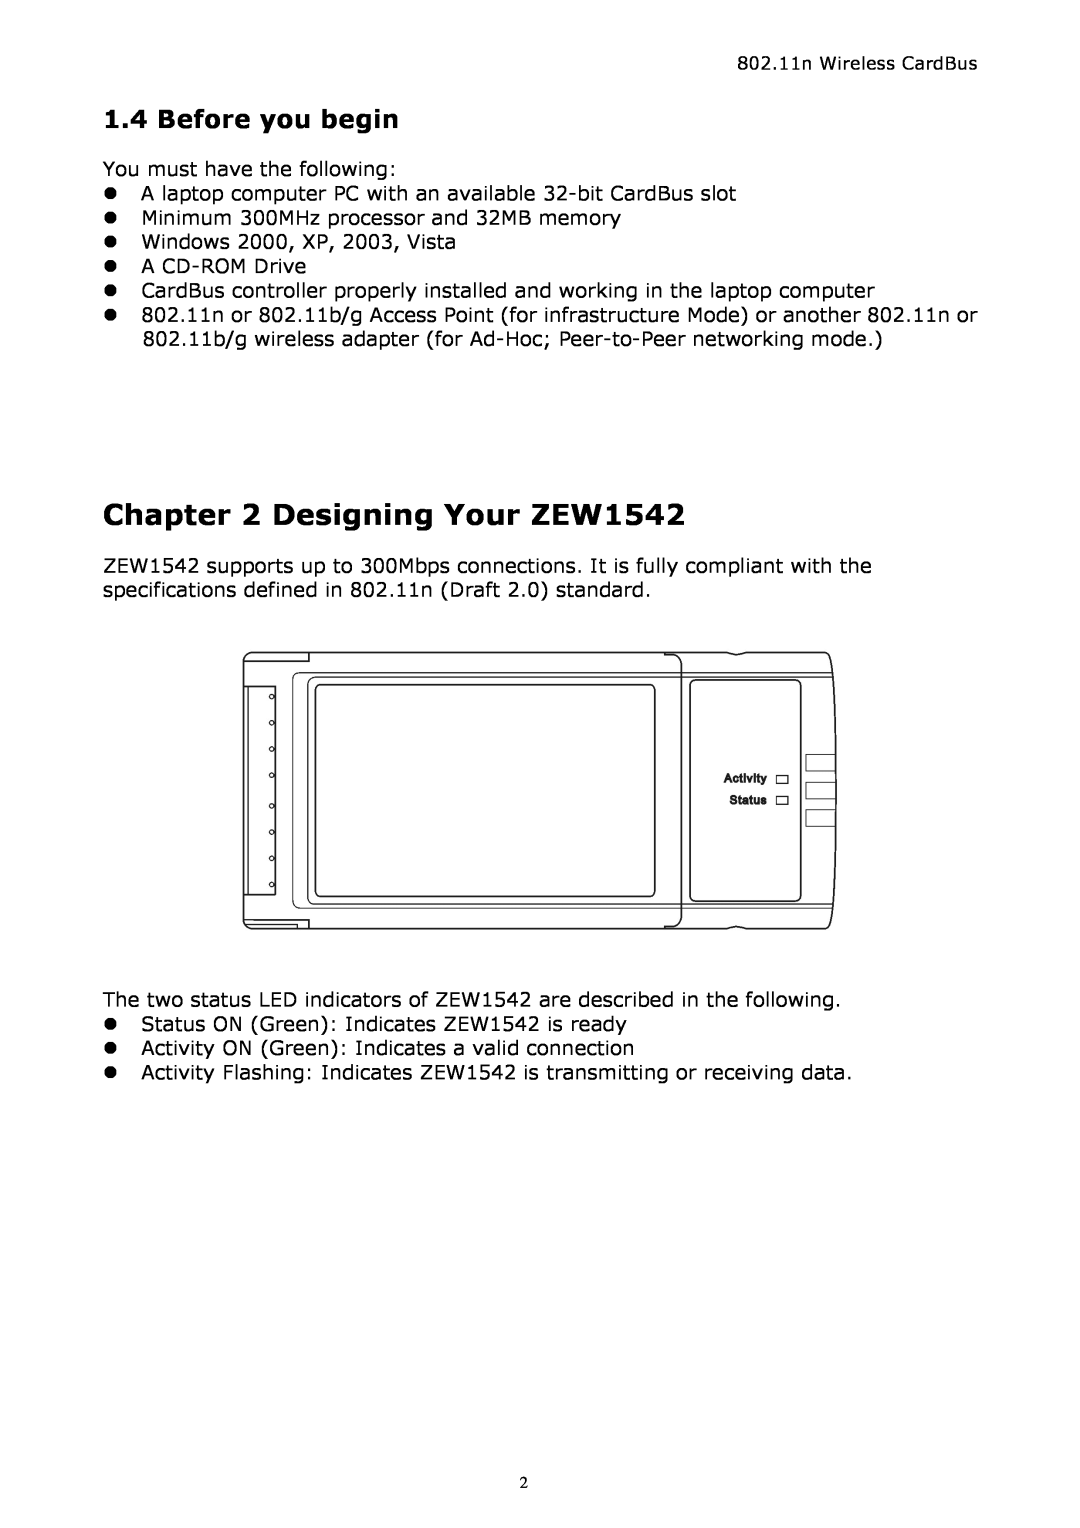 Zonet Technology manual Designing Your ZEW1542, Before you begin 